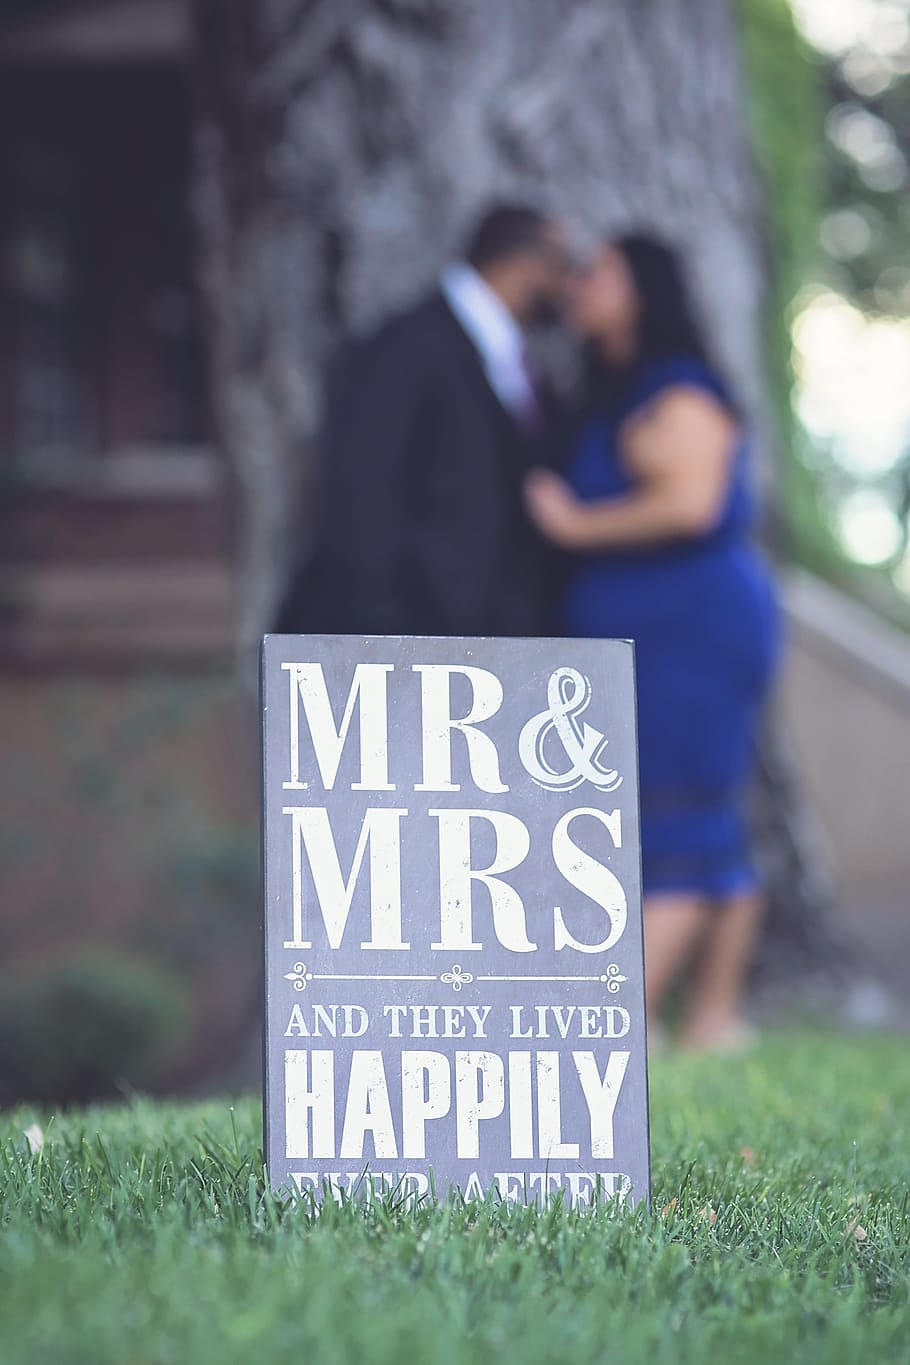 mr.&mrs., mr .&mrs poster, green, grass, Engaged, Happily Ever After, Celebration, engagement, love, romance